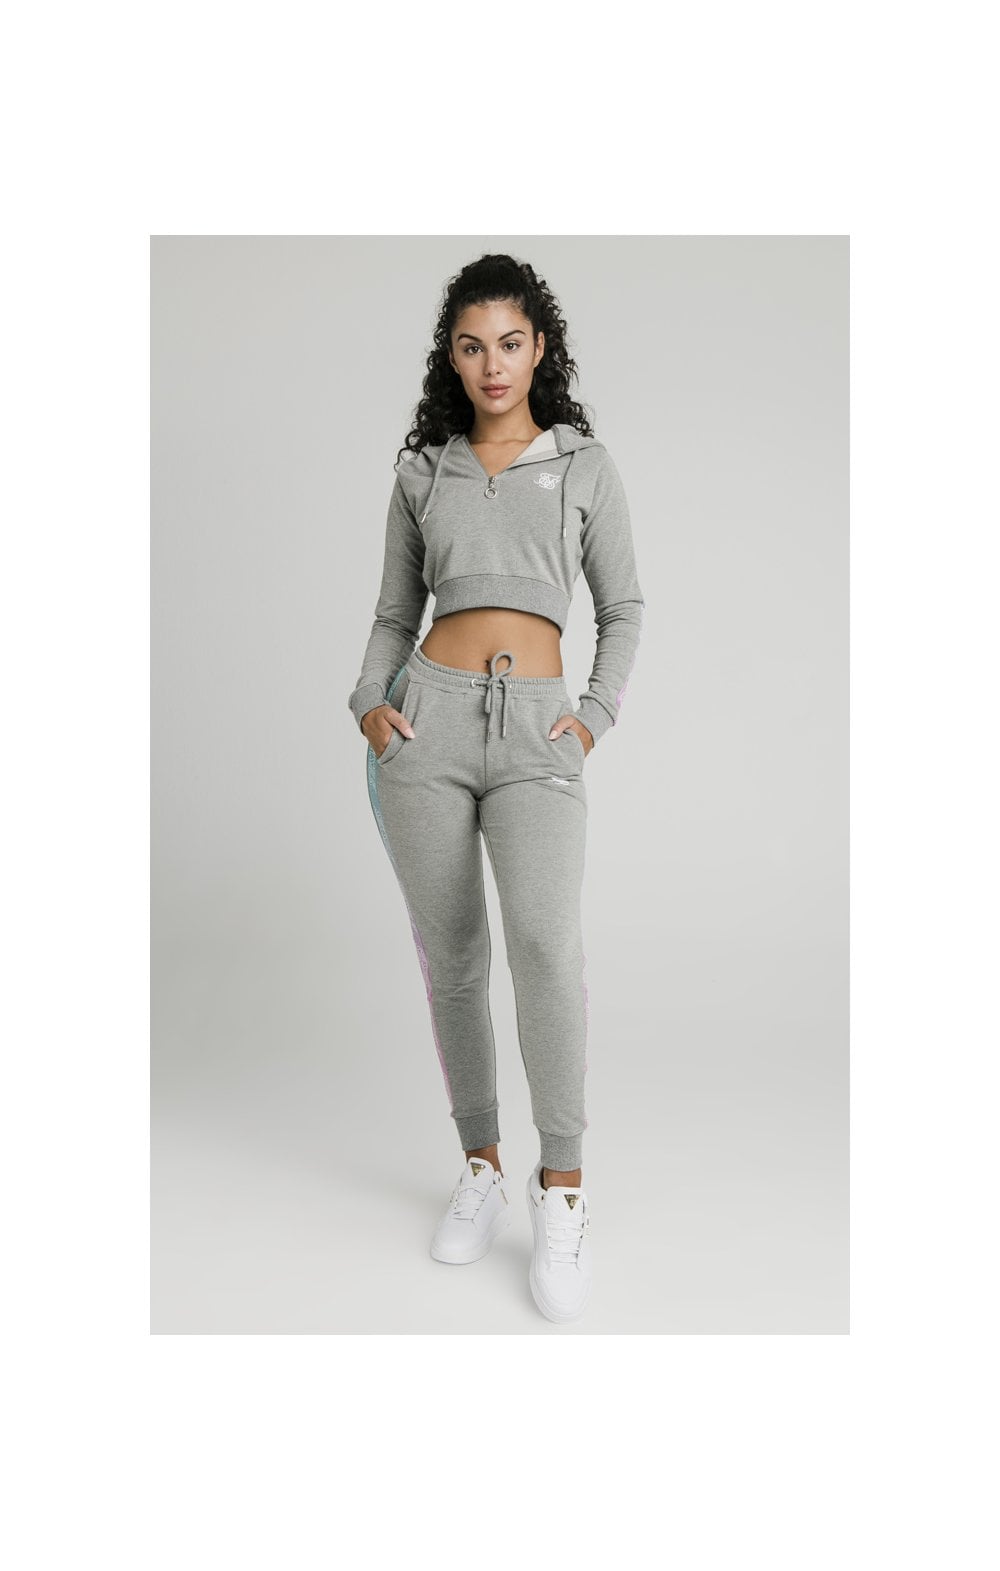 Load image into Gallery viewer, SikSilk Fade Runner Track Top - Grey Marl (3)